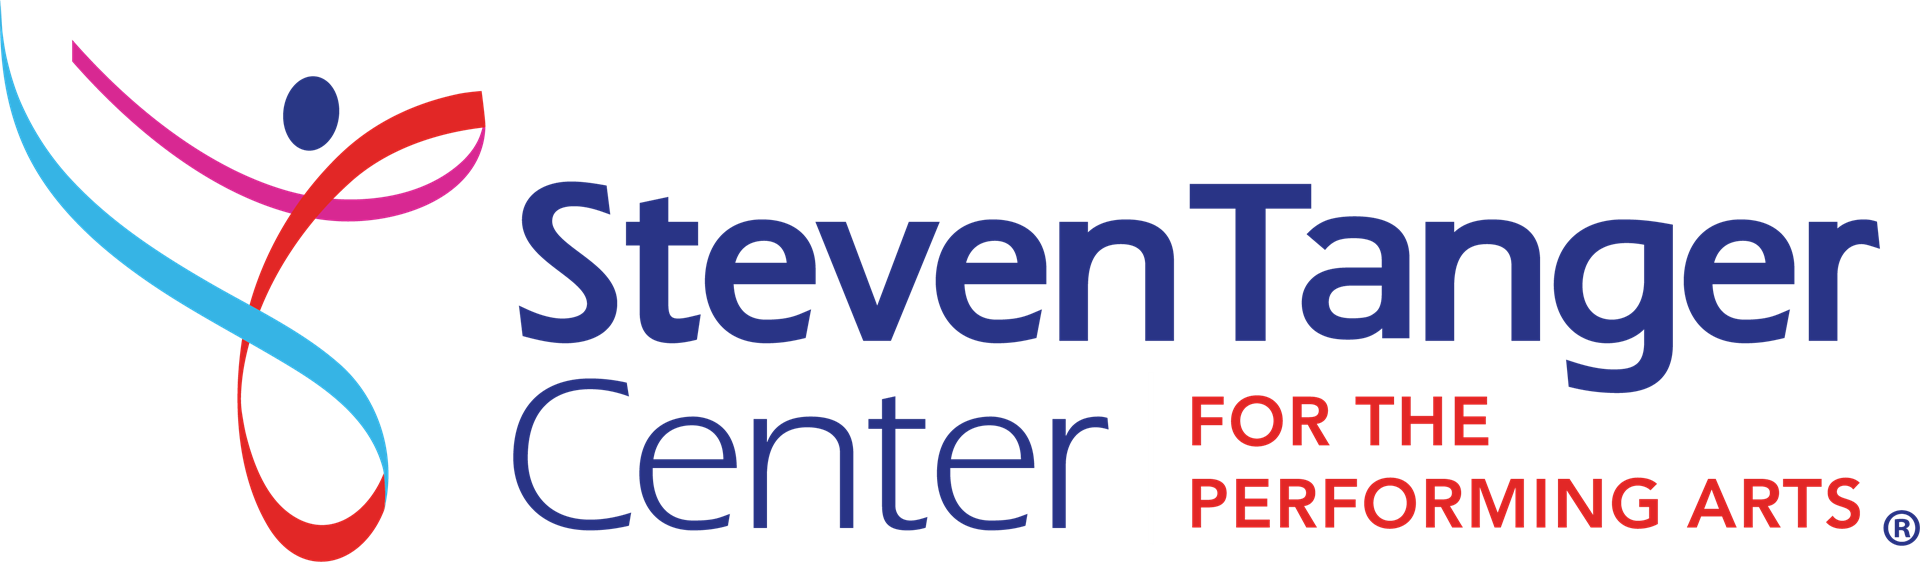 link to website: Steven Tanger Center for the Performing Arts